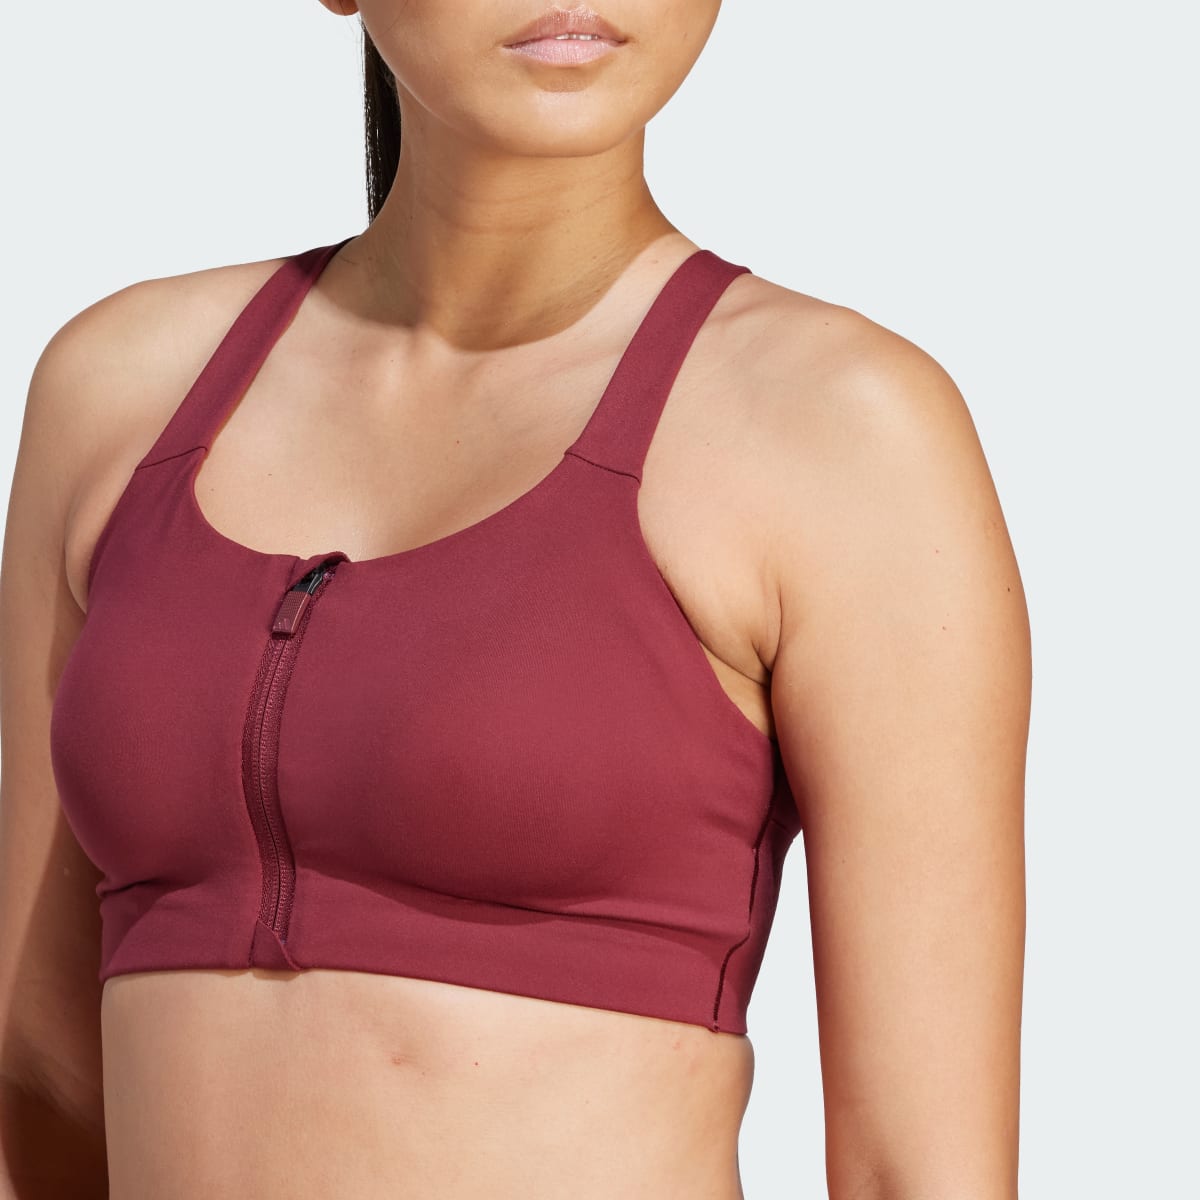 Adidas Brassière zippée maintien fort TLRD Impact Luxe. 7